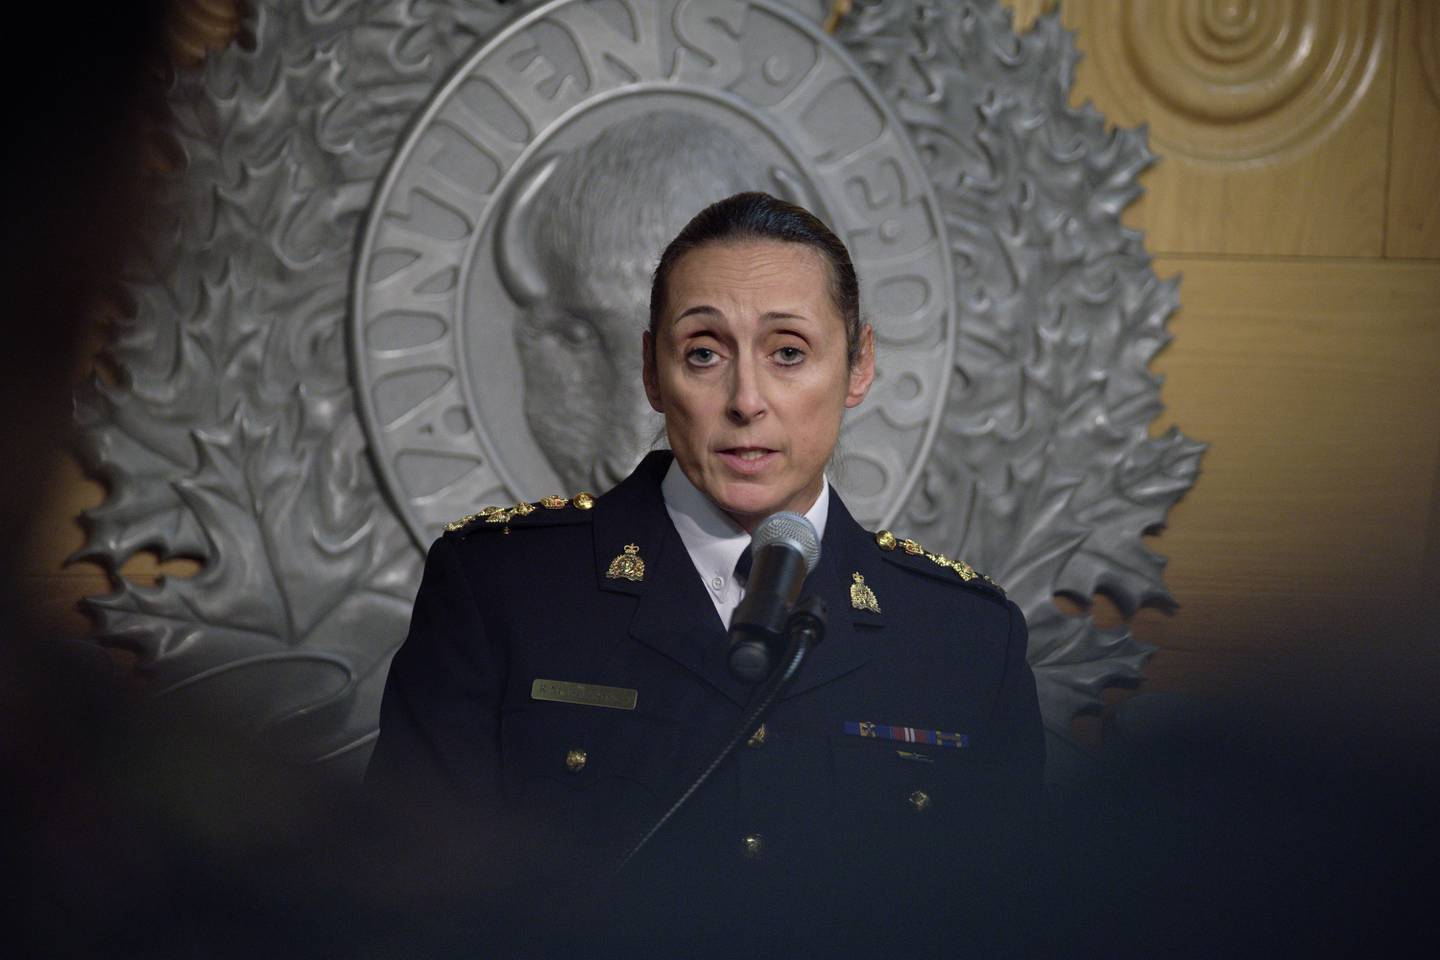 Assistant Commissioner Rhonda Blackmore speaks at the Royal Canadian Mounted Police F Division headquarters in Regina, Saskatchewan, on Sunday. AP